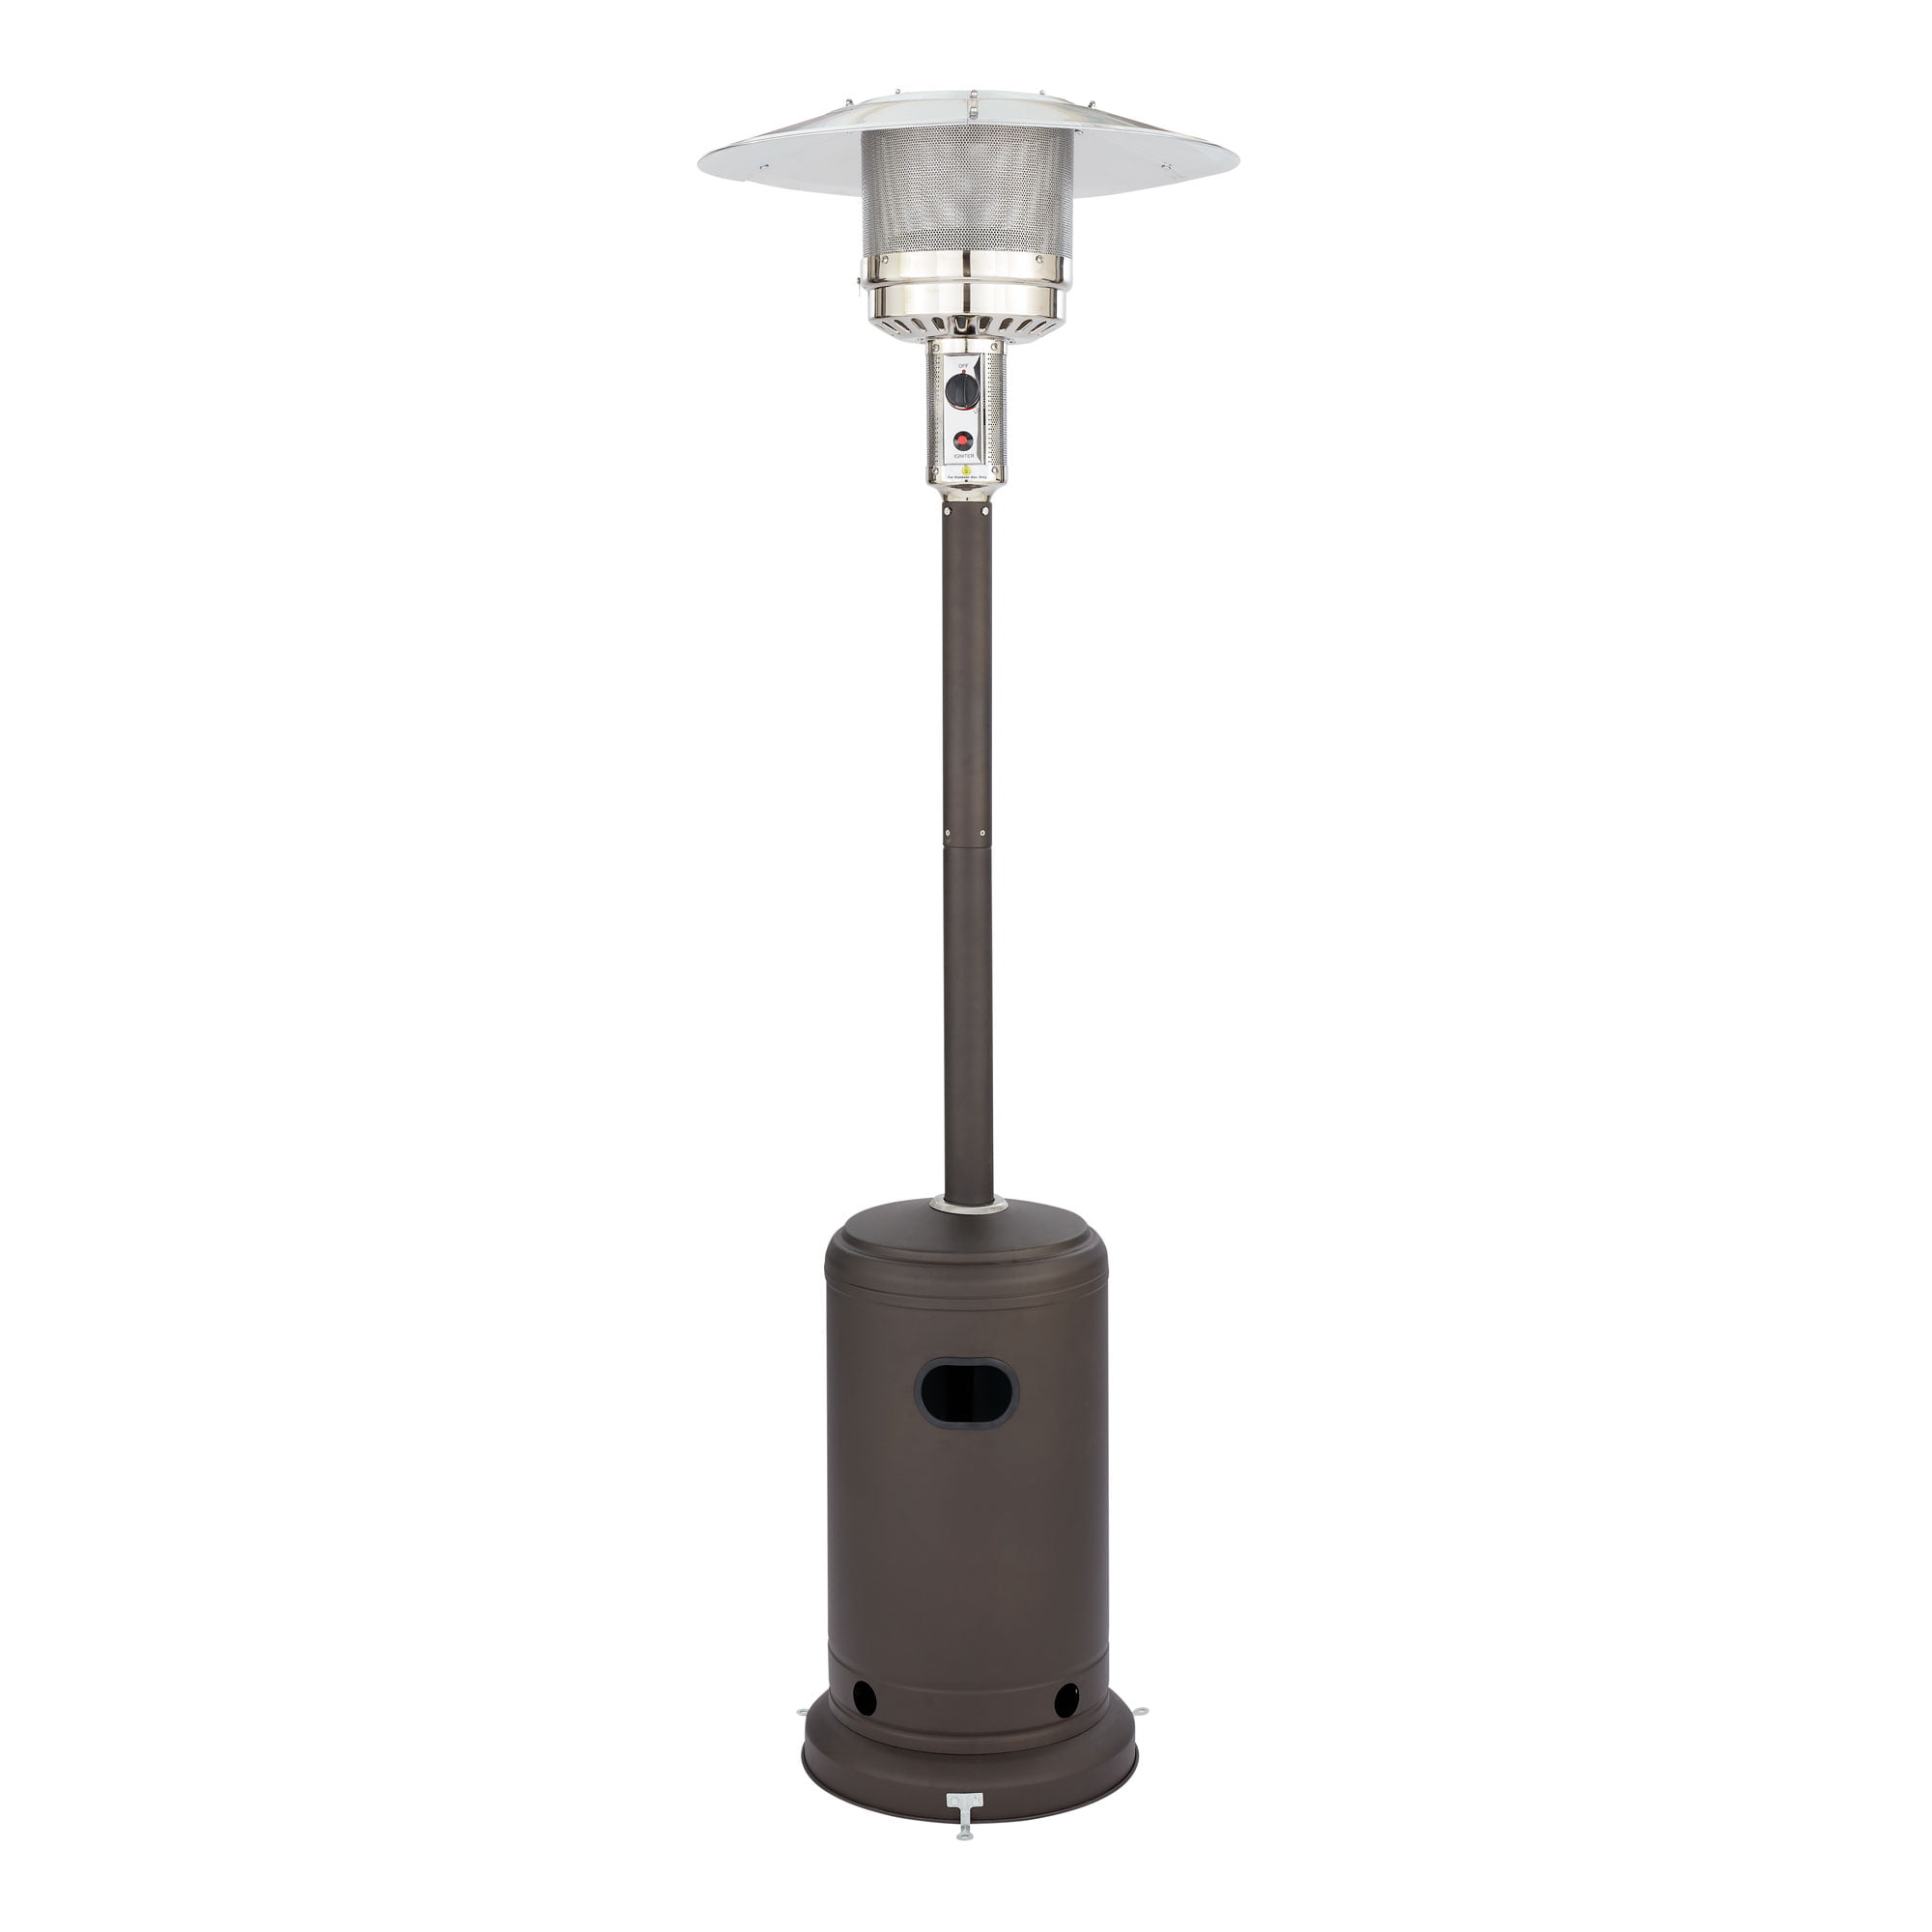 Brown Mainstay Tall Mocha Patio Heater .# 1 30.00 x 30.00 x 85.00 Inches